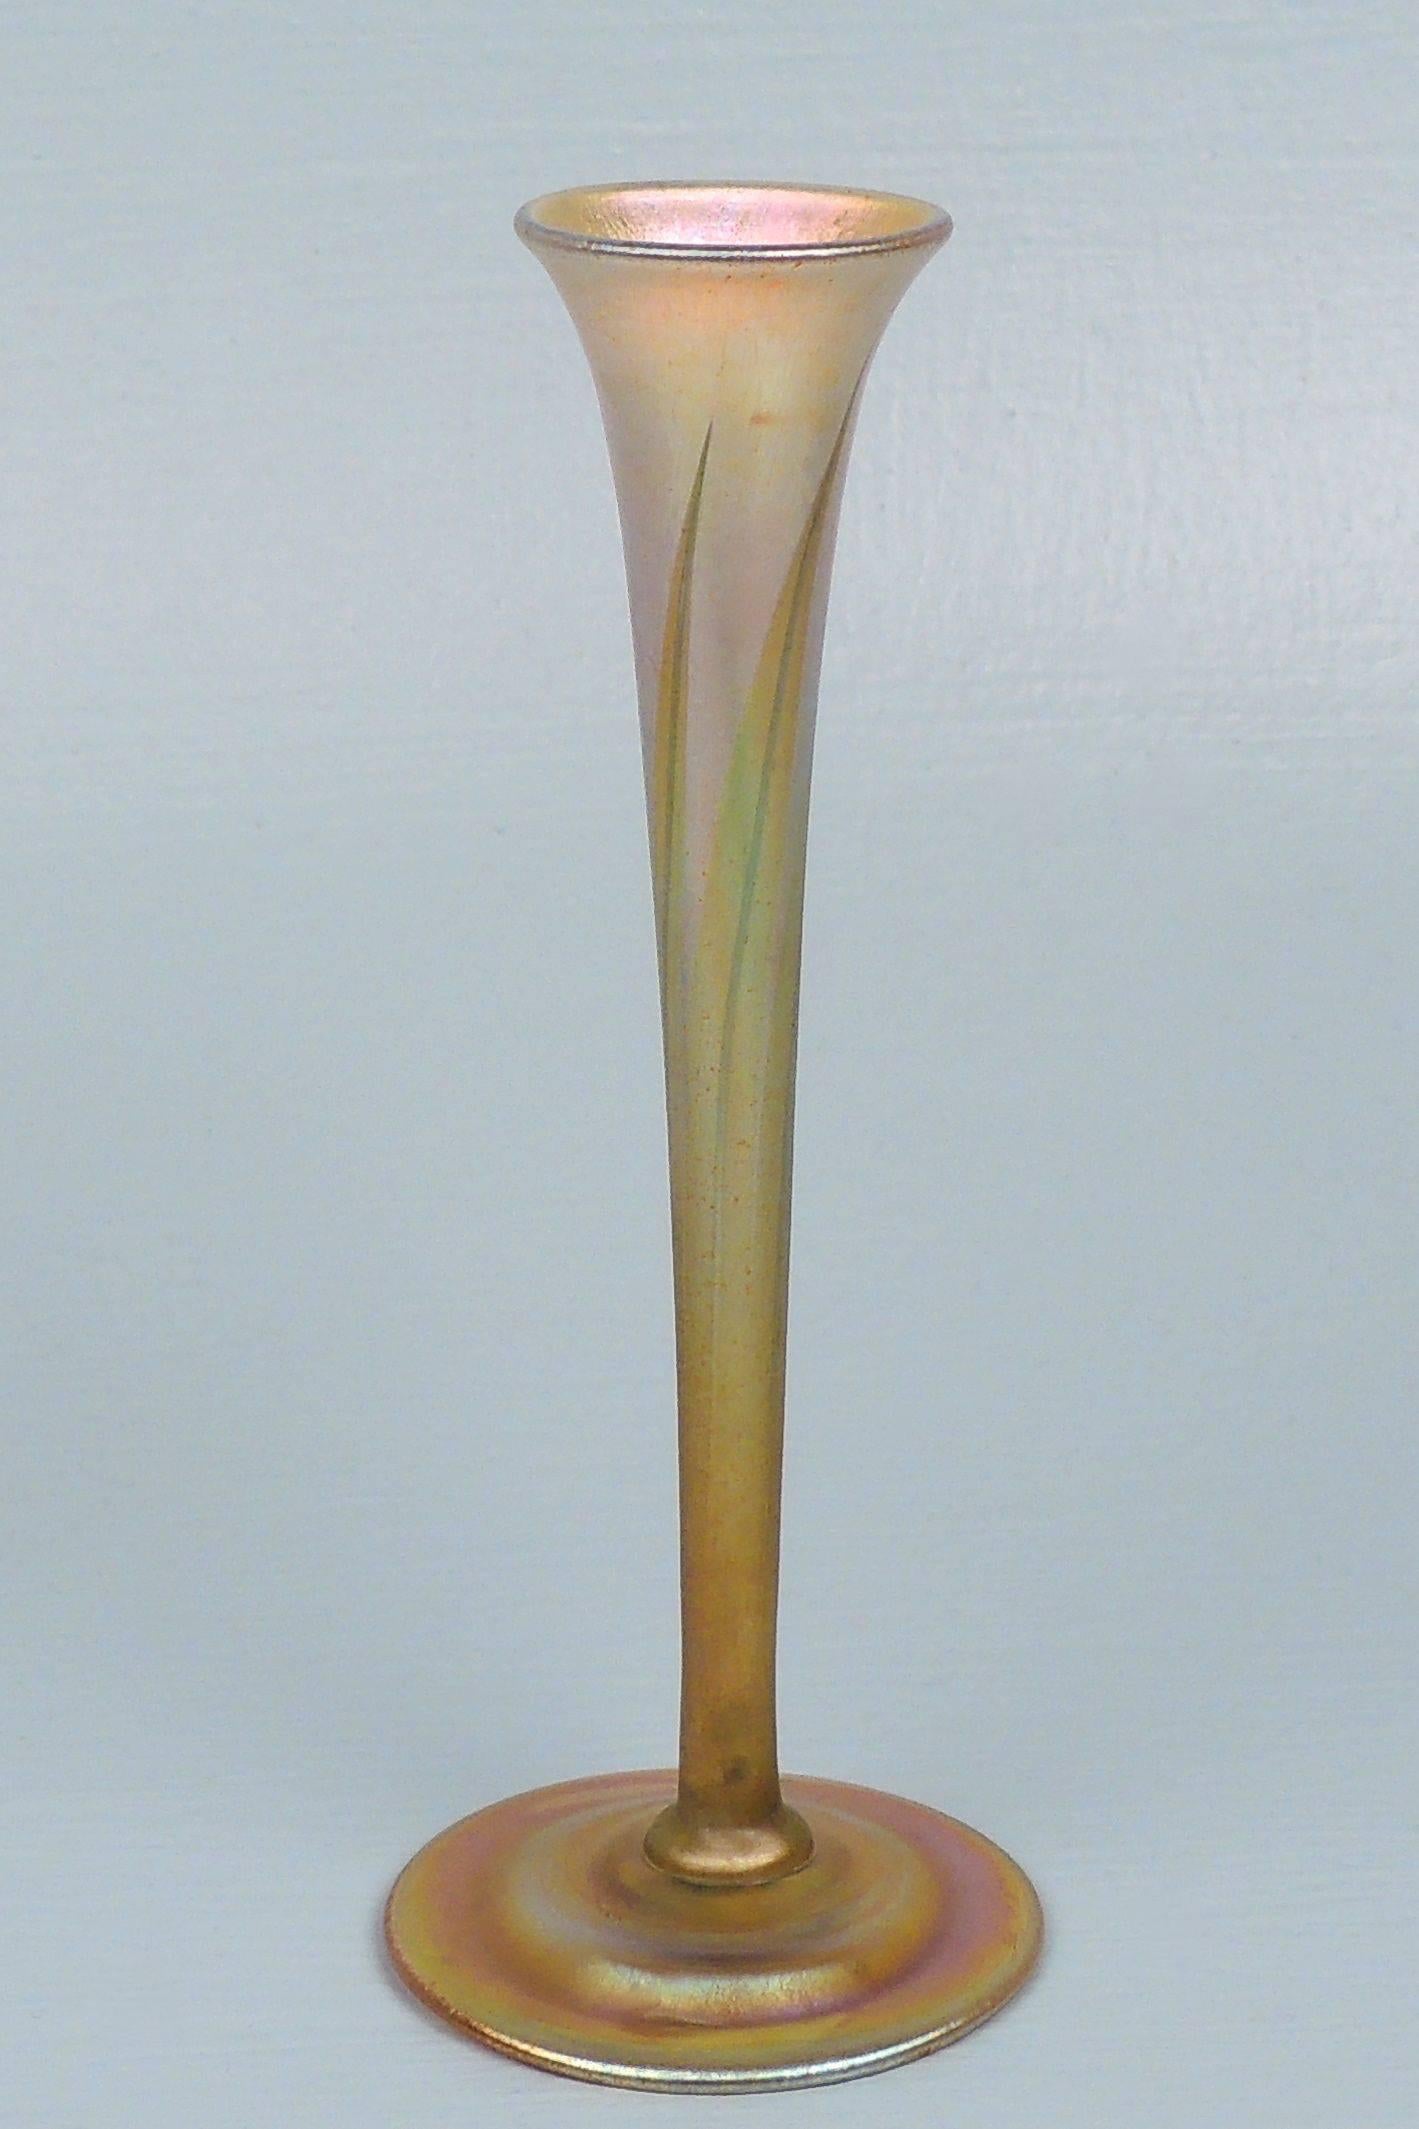 An elegant Tiffany Favrile art glass bud vase with iridescent pulled feather design. The color shifts from platinum above to an orange at the base and foot.
The trumpet form top sit slightly askew on a round foot and evidences the spontaneous